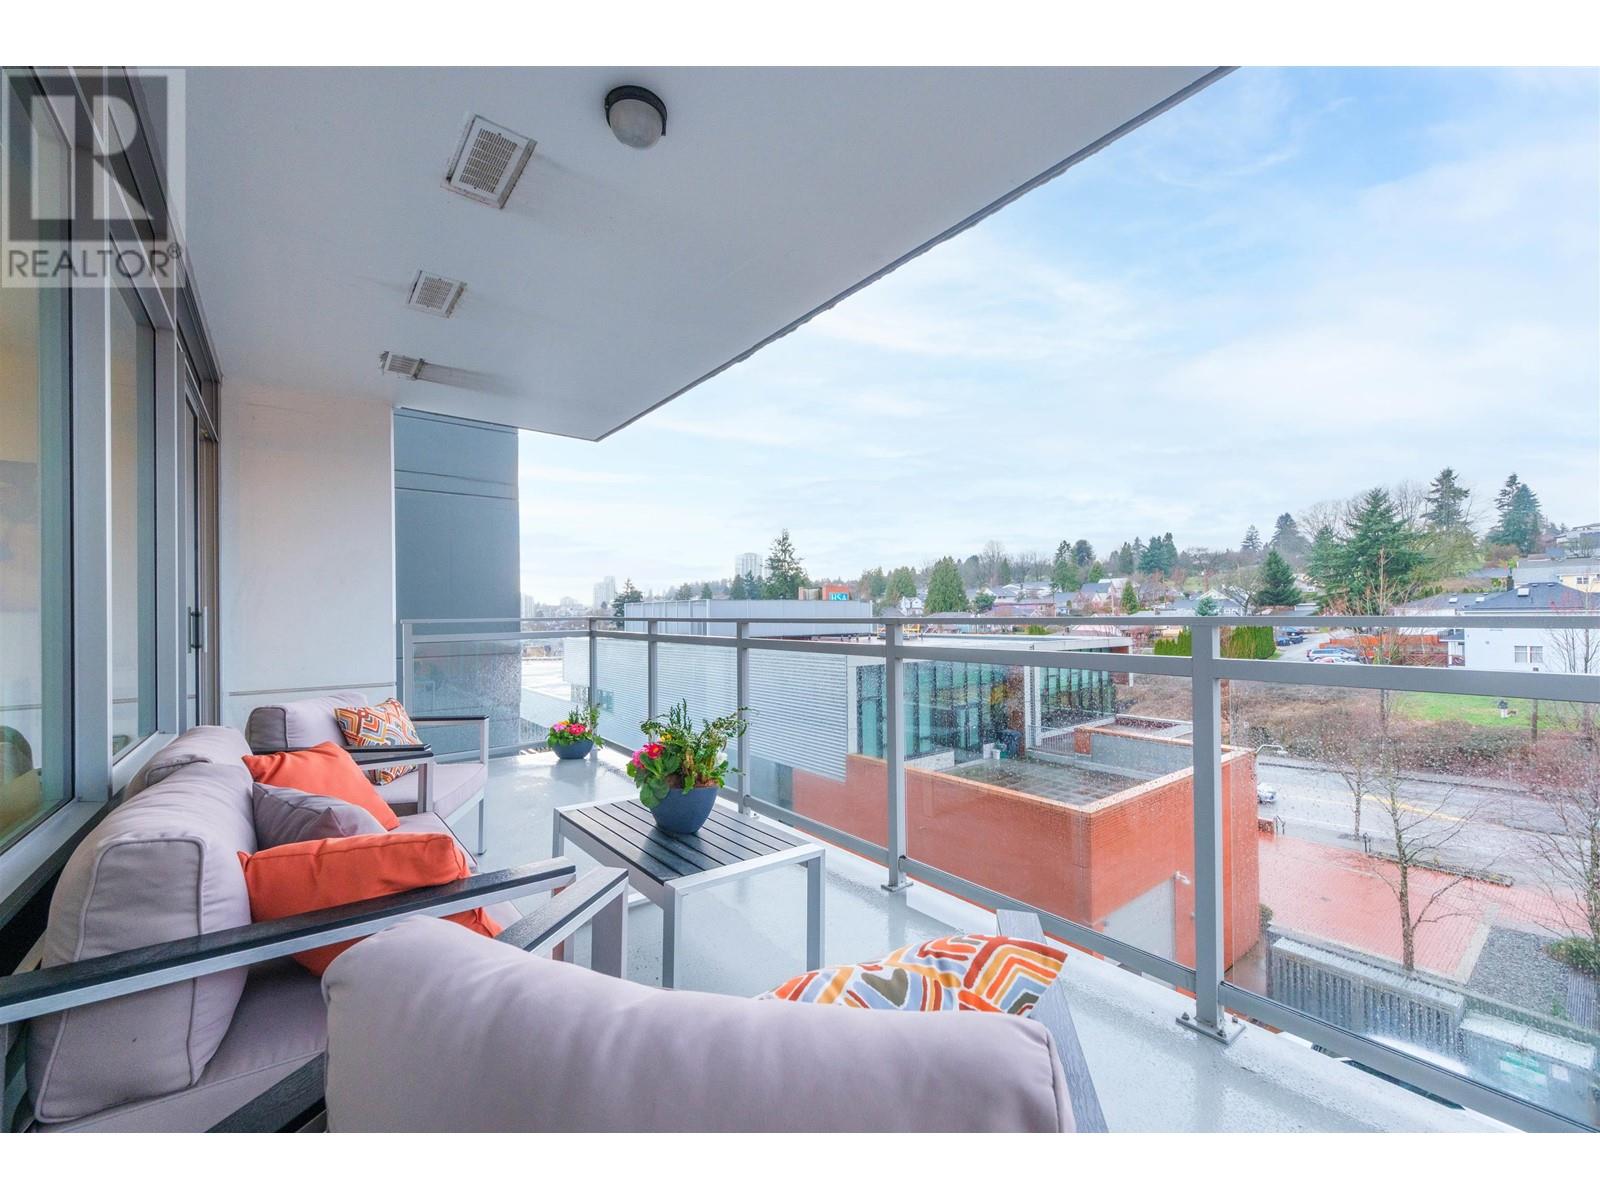 503 200 NELSON'S CRESCENT, new westminster, British Columbia